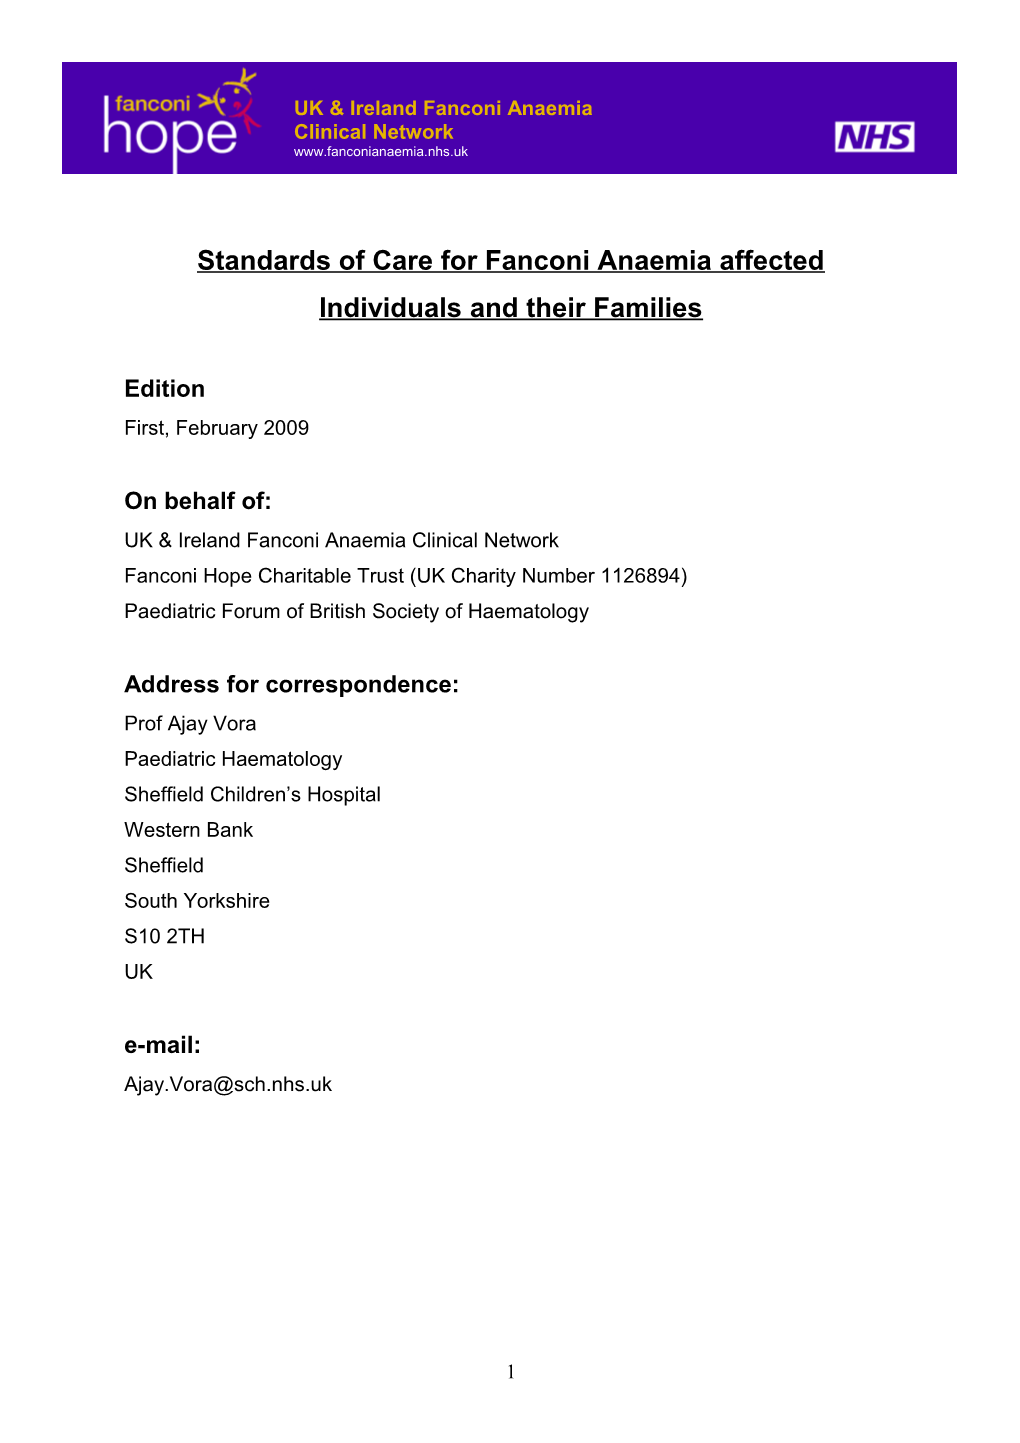 Standards of Care for Fanconi Anaemia Affected Individuals and Their Families